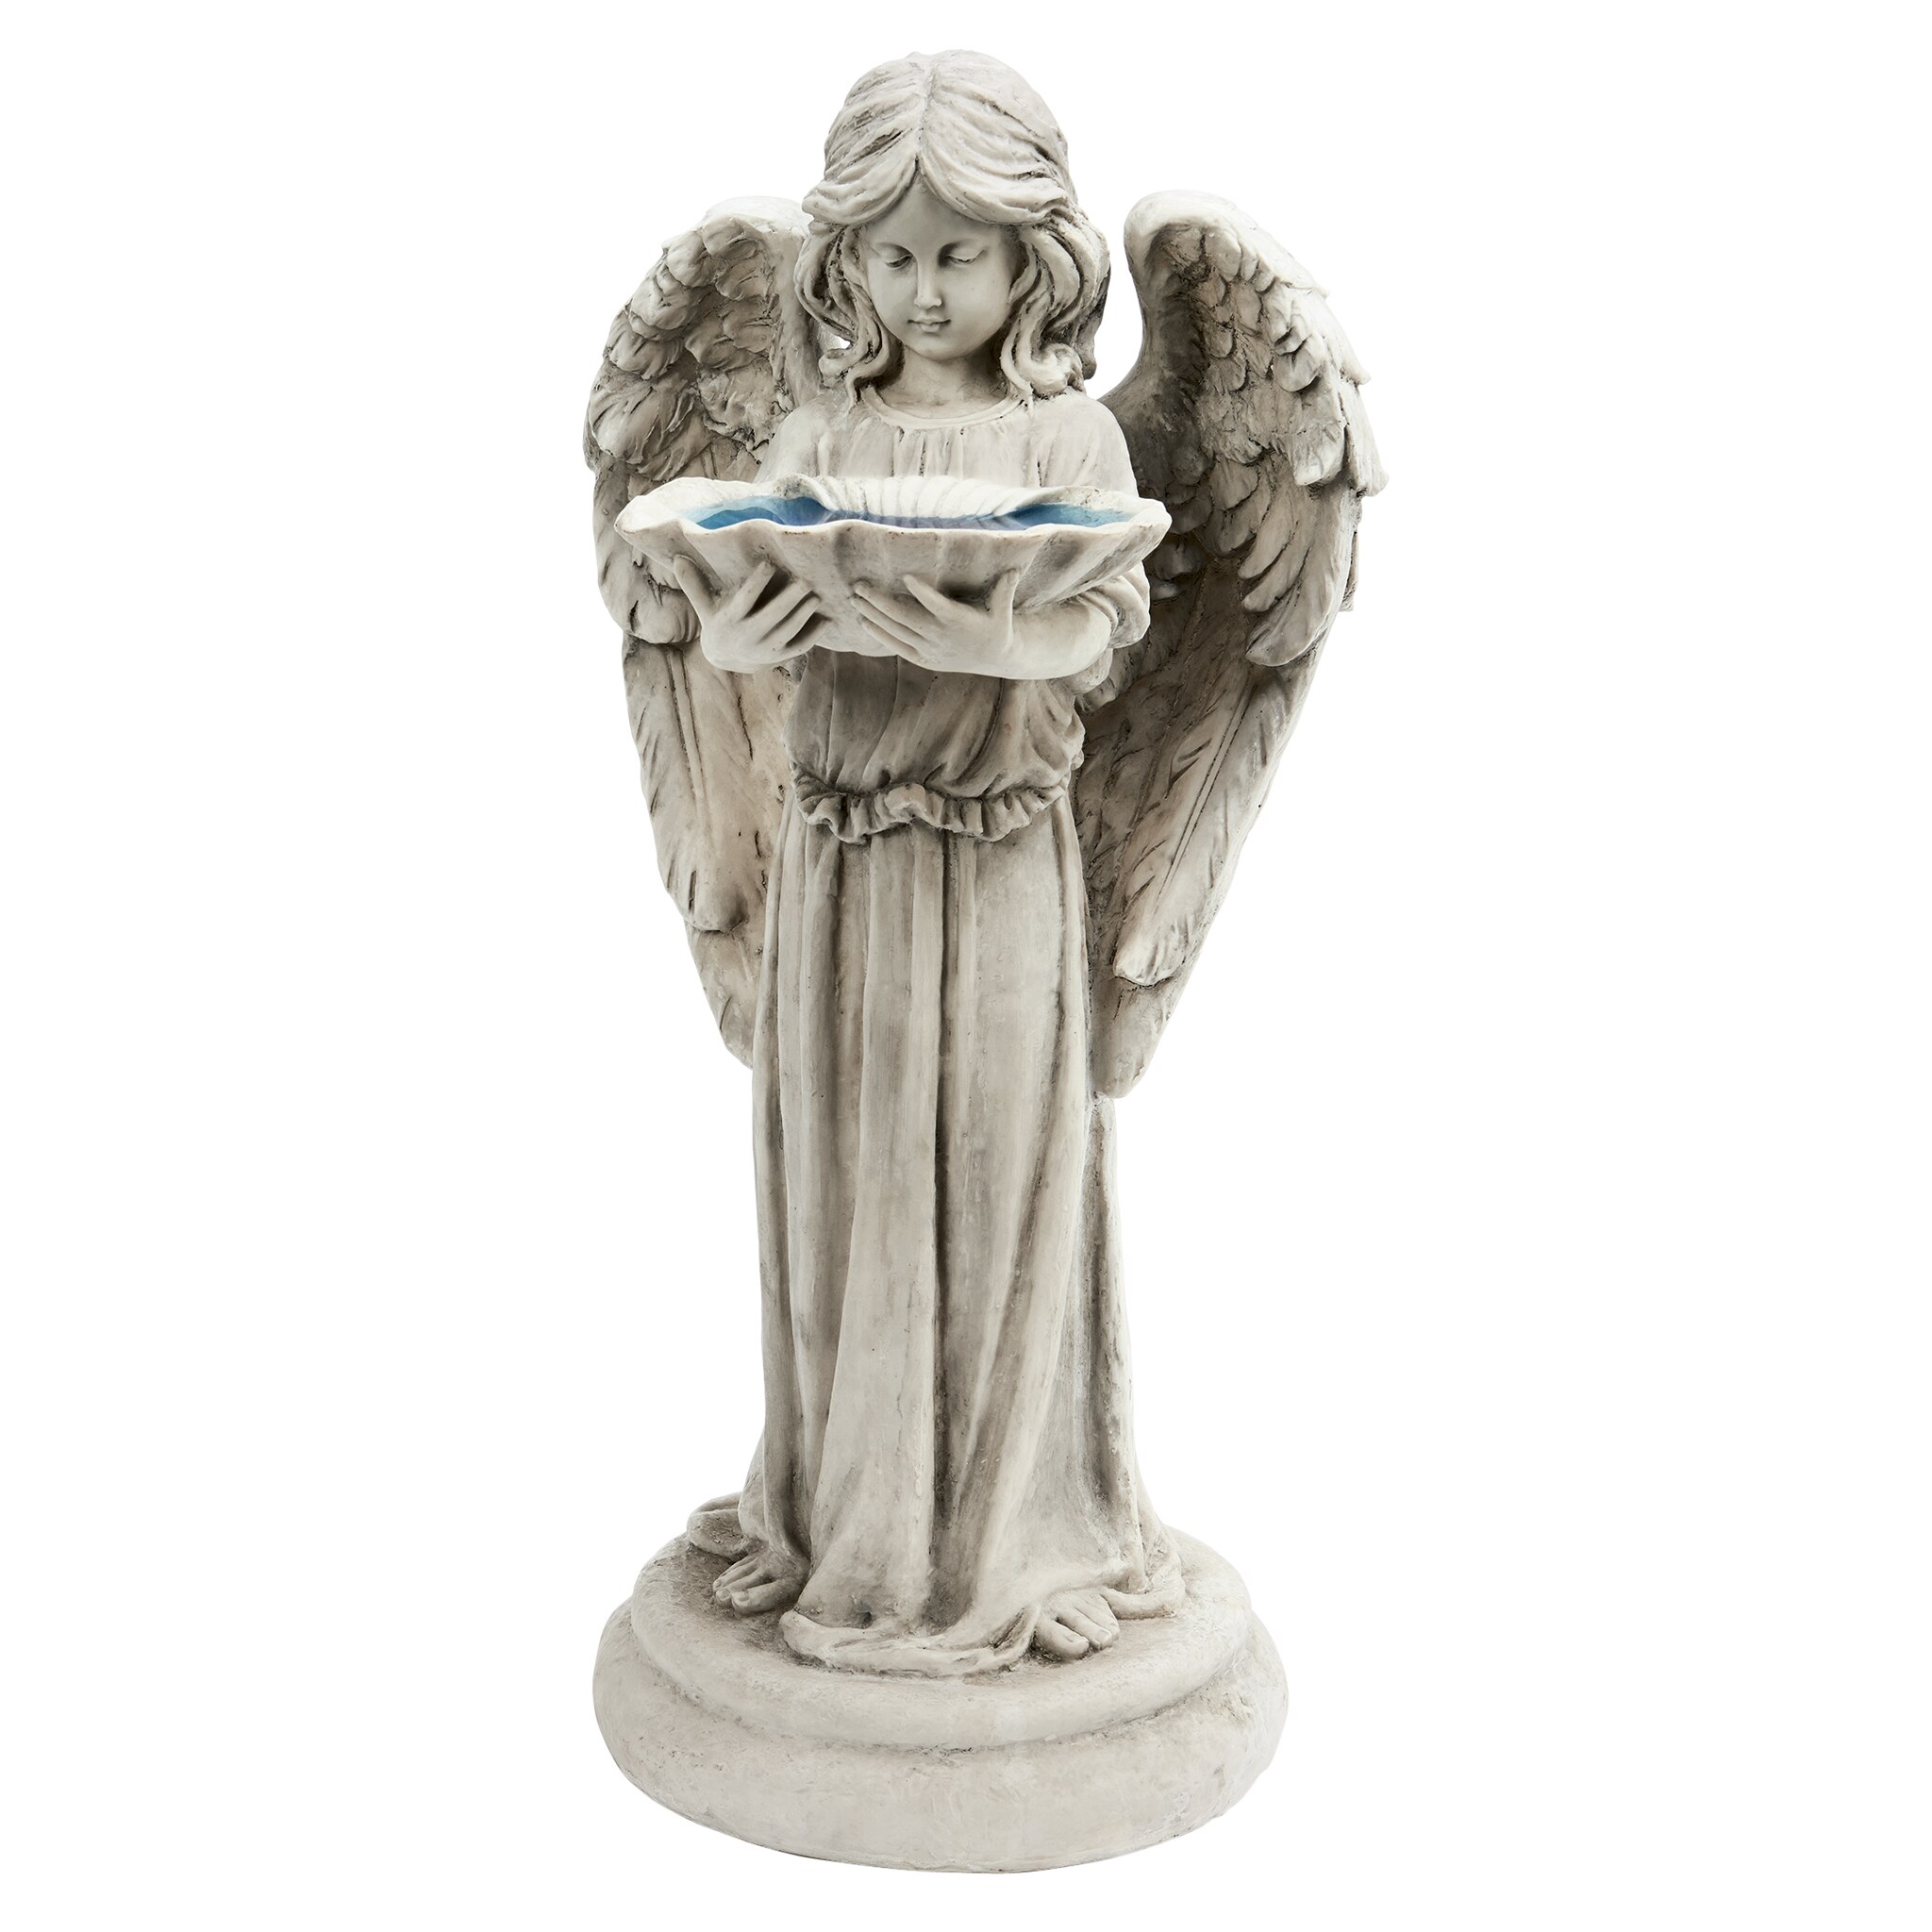 Design Toscano Cherubs Care Angelic Glass-Topped Sculptural Table 